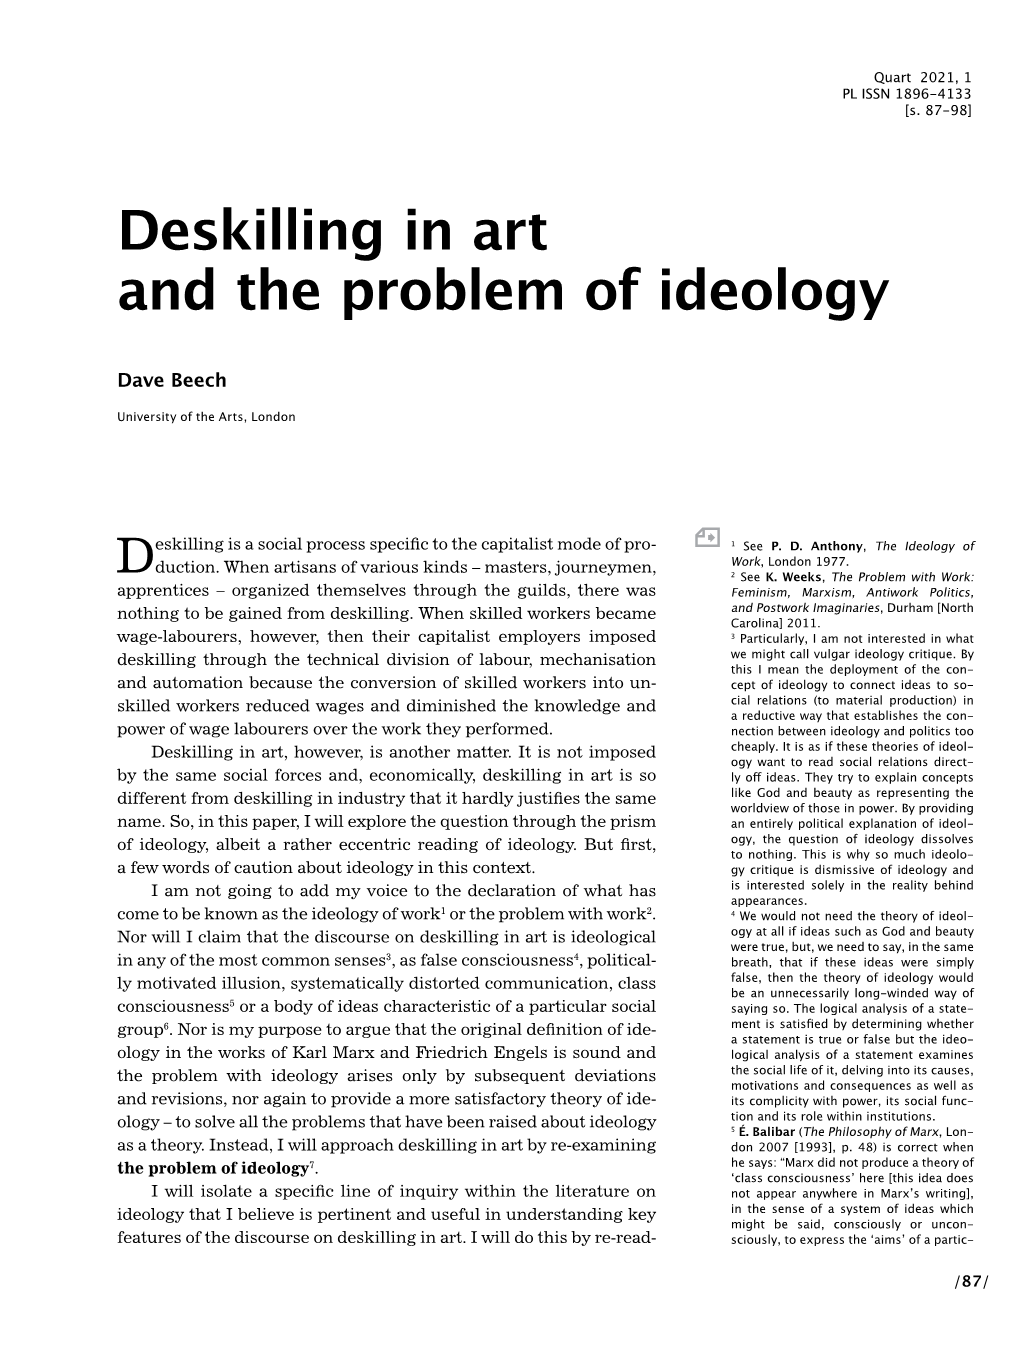 Deskilling in Art and the Problem of Ideology